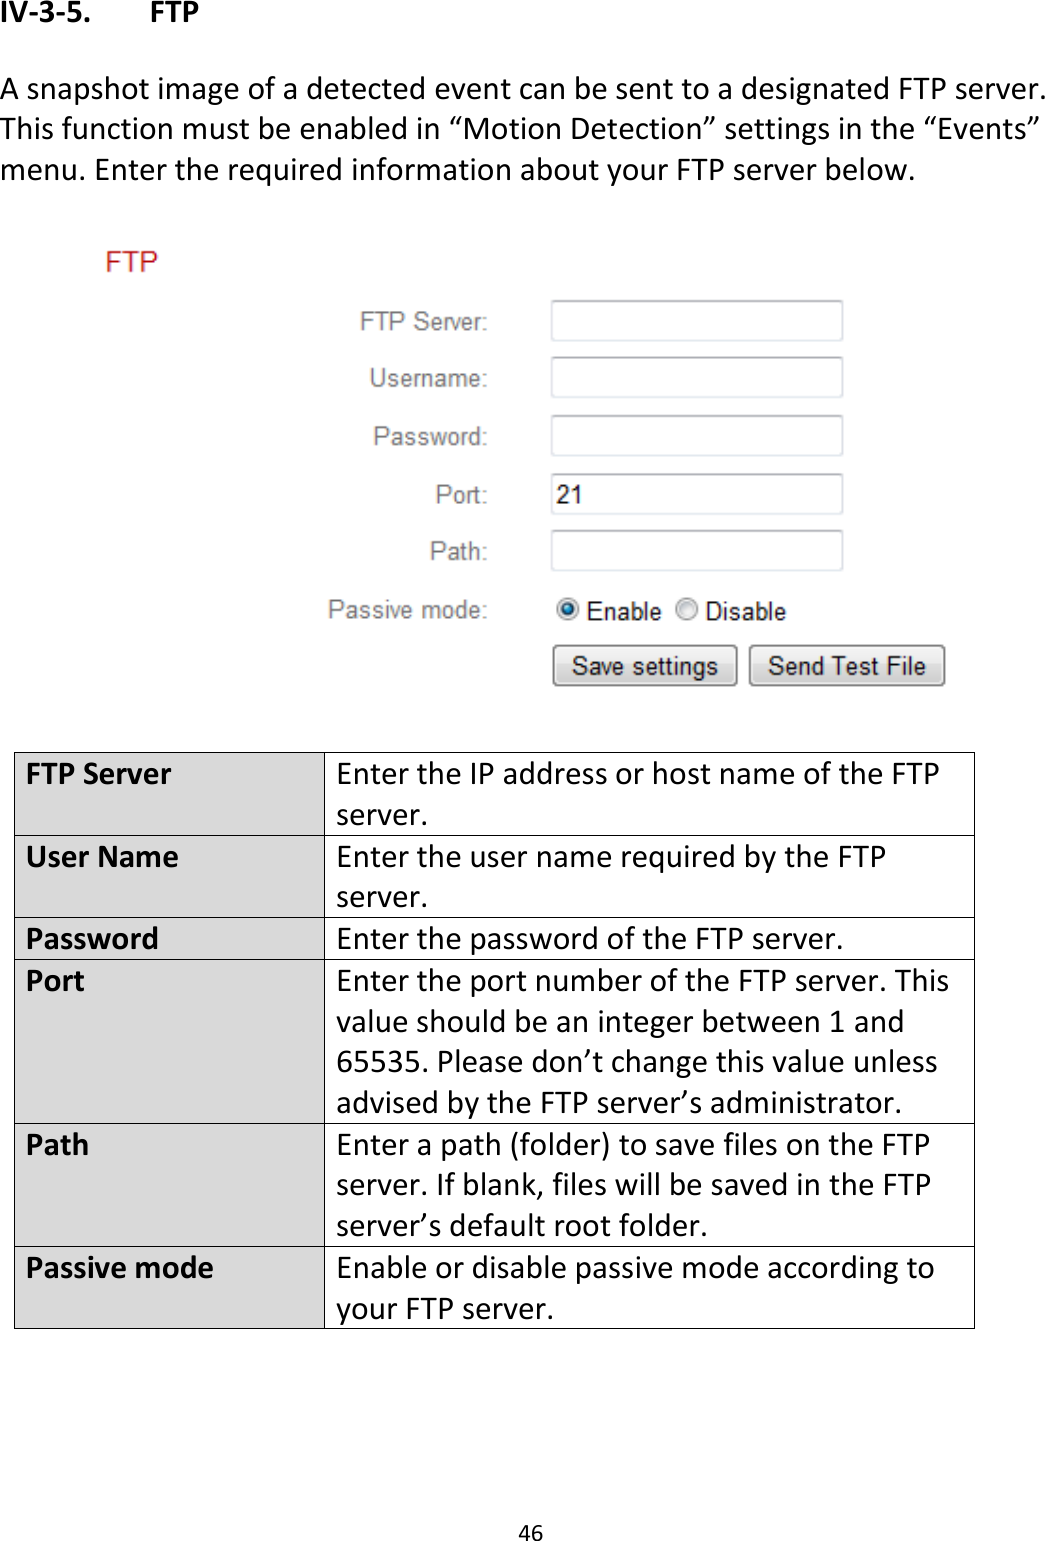 46  IV-3-5.   FTP  A snapshot image of a detected event can be sent to a designated FTP server. This function must be enabled in “Motion Detection” settings in the “Events” menu. Enter the required information about your FTP server below.    FTP Server Enter the IP address or host name of the FTP server. User Name Enter the user name required by the FTP server. Password Enter the password of the FTP server. Port Enter the port number of the FTP server. This value should be an integer between 1 and 65535. Please don’t change this value unless advised by the FTP server’s administrator. Path Enter a path (folder) to save files on the FTP server. If blank, files will be saved in the FTP server’s default root folder. Passive mode Enable or disable passive mode according to your FTP server.  